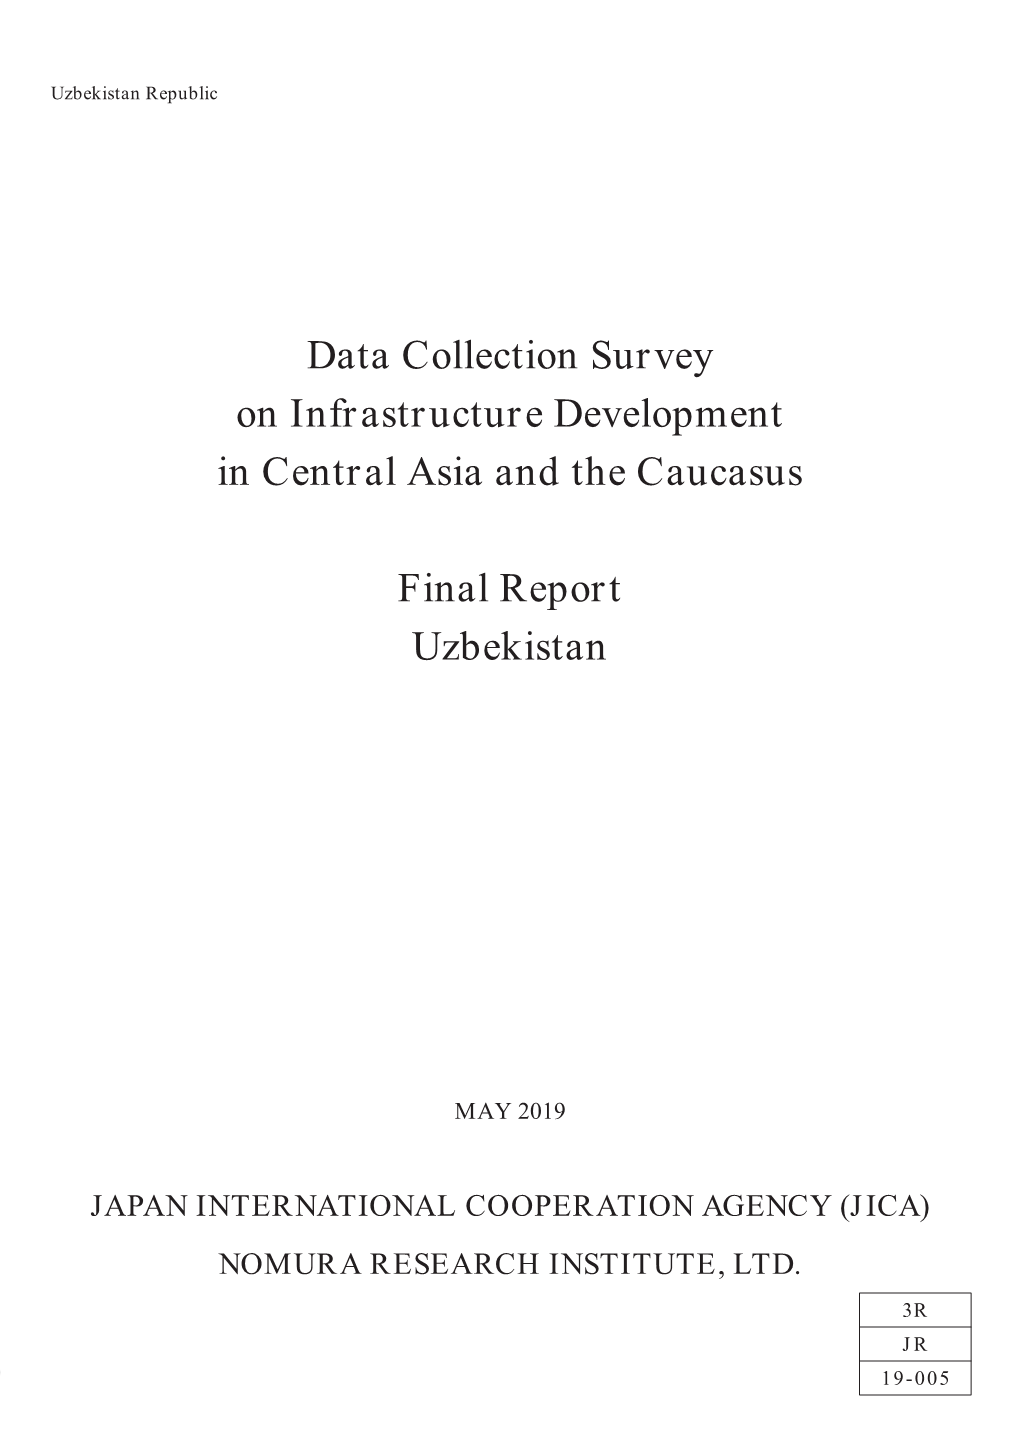 Data Collection Survey on Infrastructure Development in Central Asia and the Caucasus